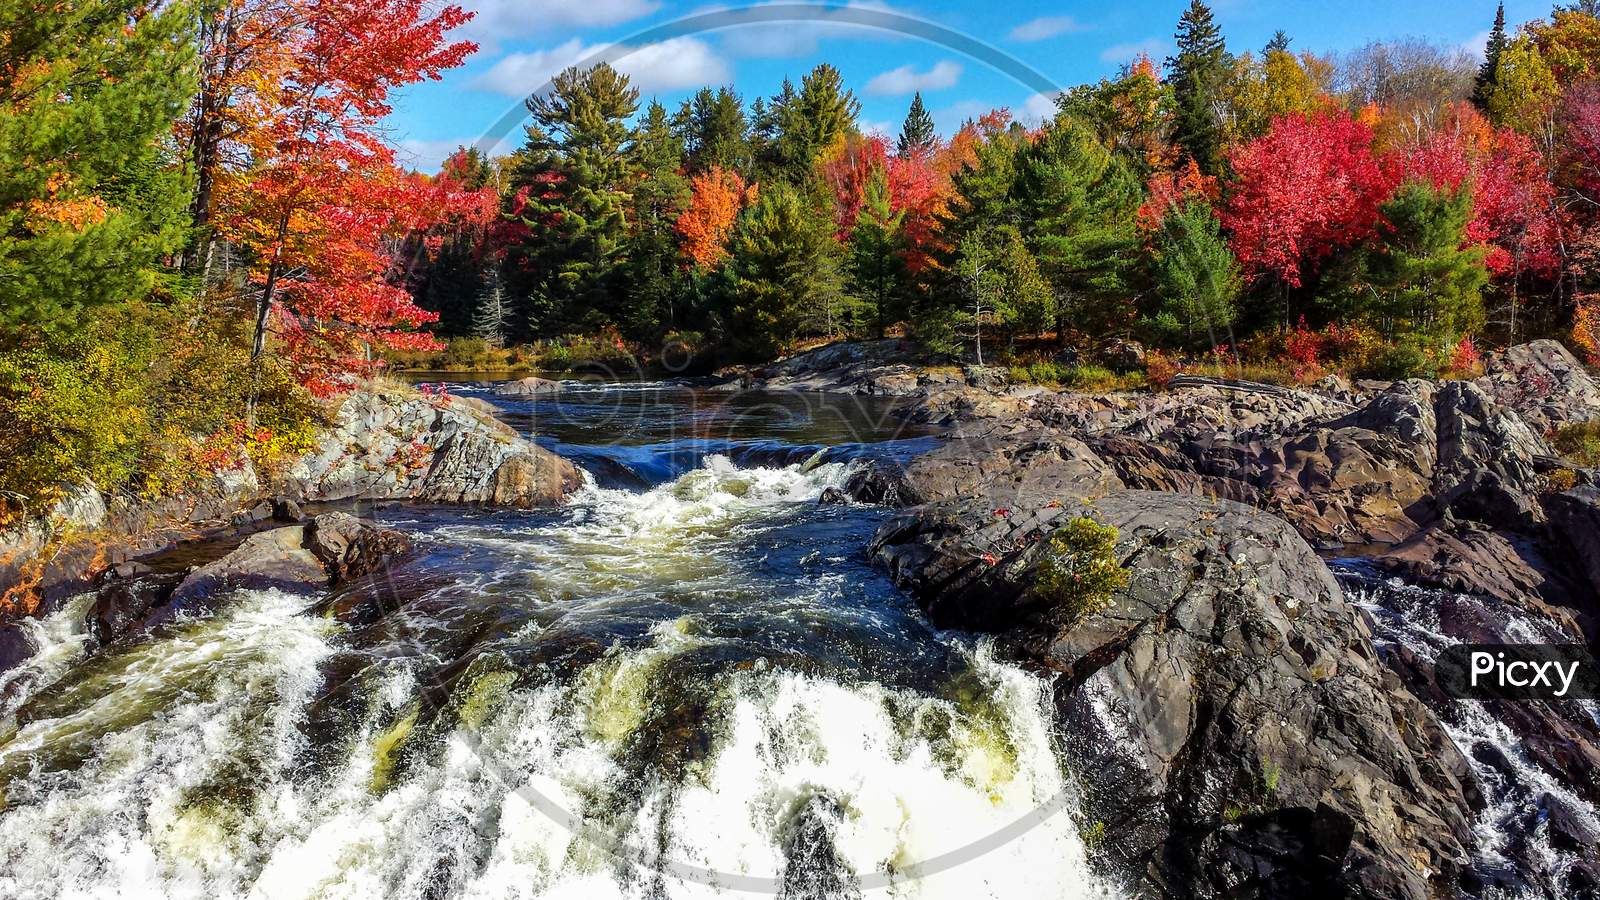 Great fall view of the flowing river, Chutes Prov Park, ON, Canada